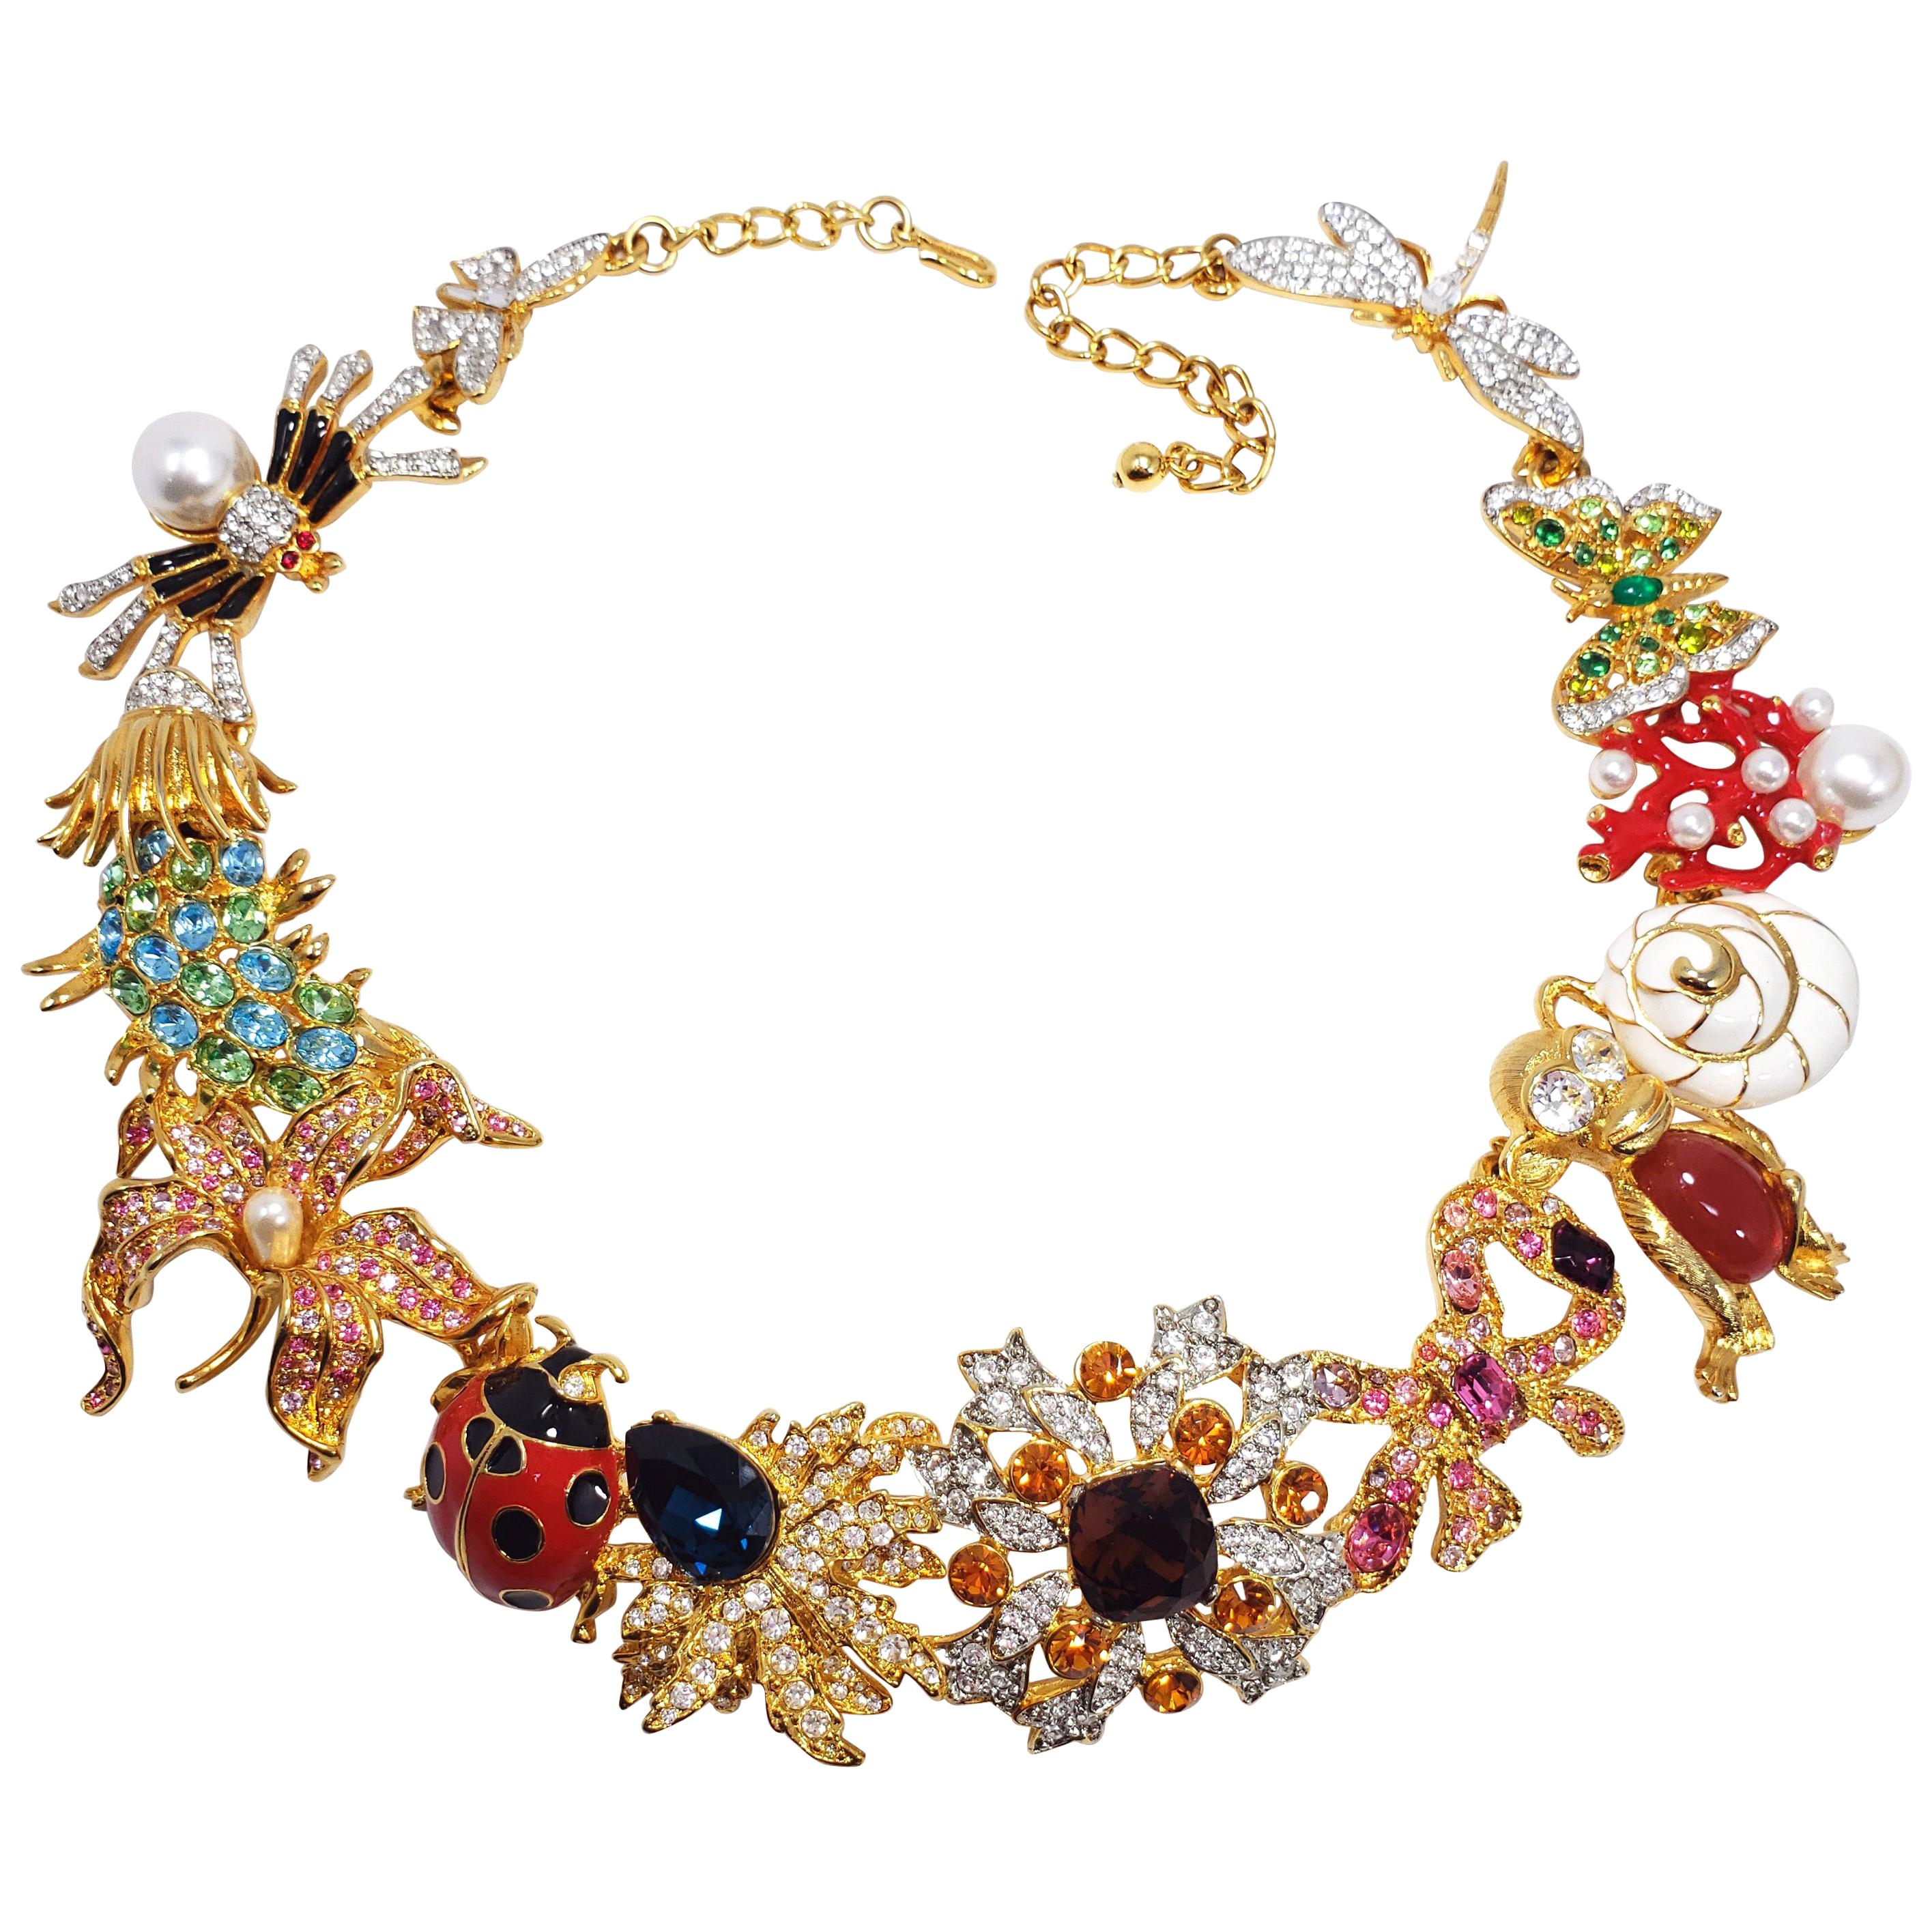 Kenneth Jay Lane Ornate Colorful Crystal Kaleidoscope Collar Necklace in Gold For Sale